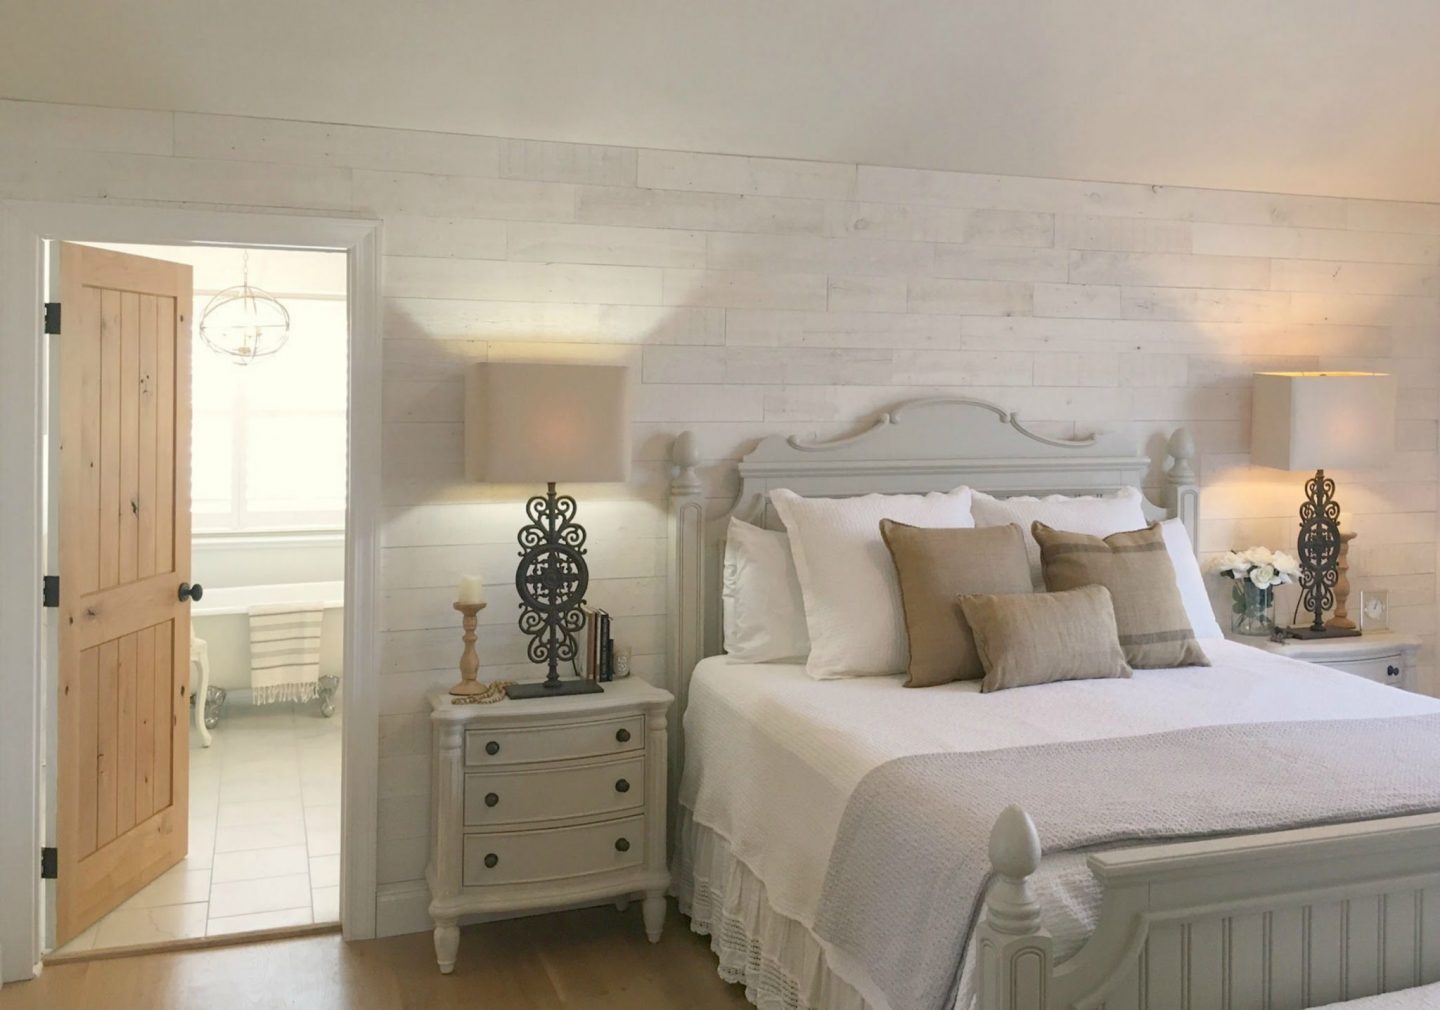 My serene white bedroom with Stikwood (Hamptons) statement wall, cottage style furniture, knotty alder door with oiled bronze hardware, and white oak wide plank hardwood flooring. Come explore 11 Simple Decor Tweaks to Enhance Your Interiors!